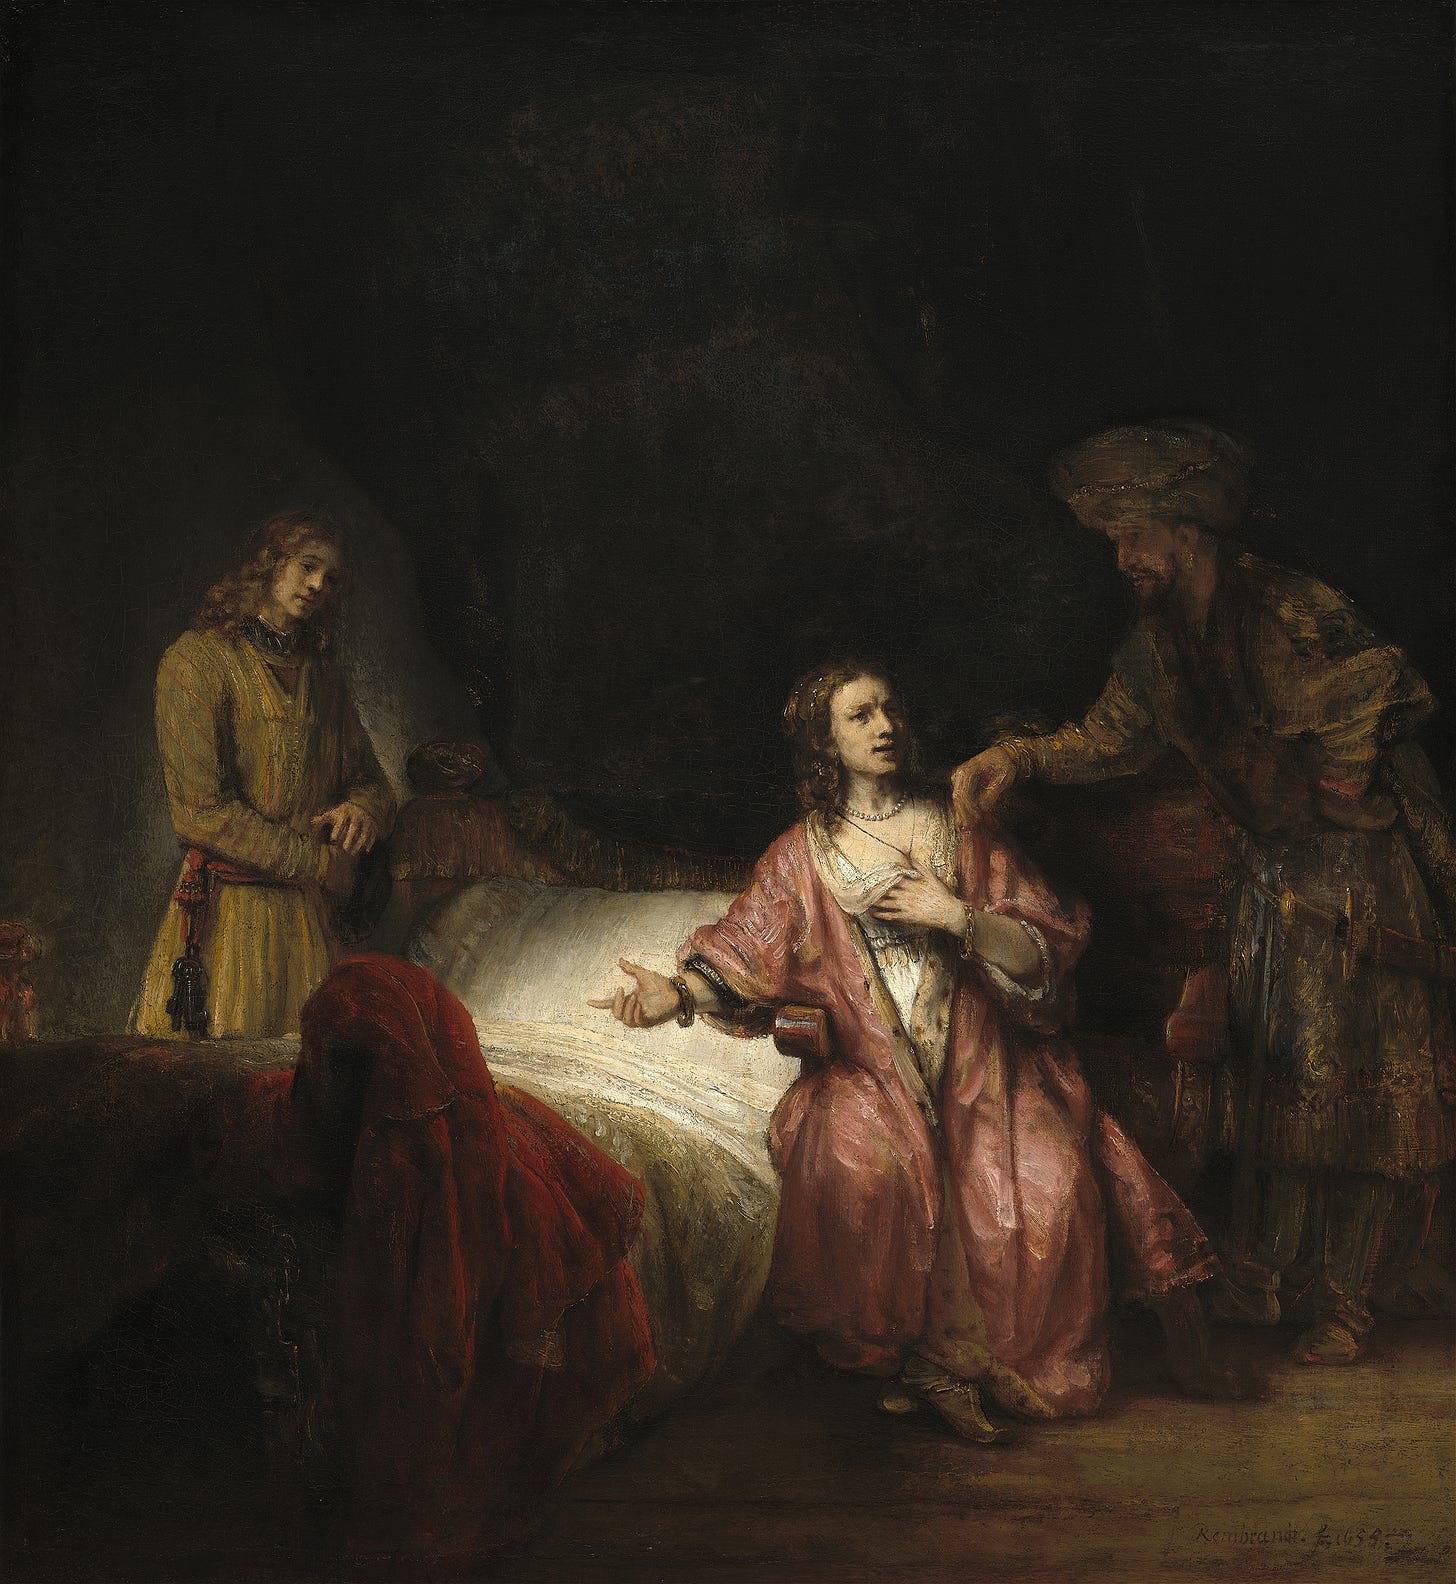 Joseph Accused by Potiphar’s Wife (1655) by Rembrandt van Rijn